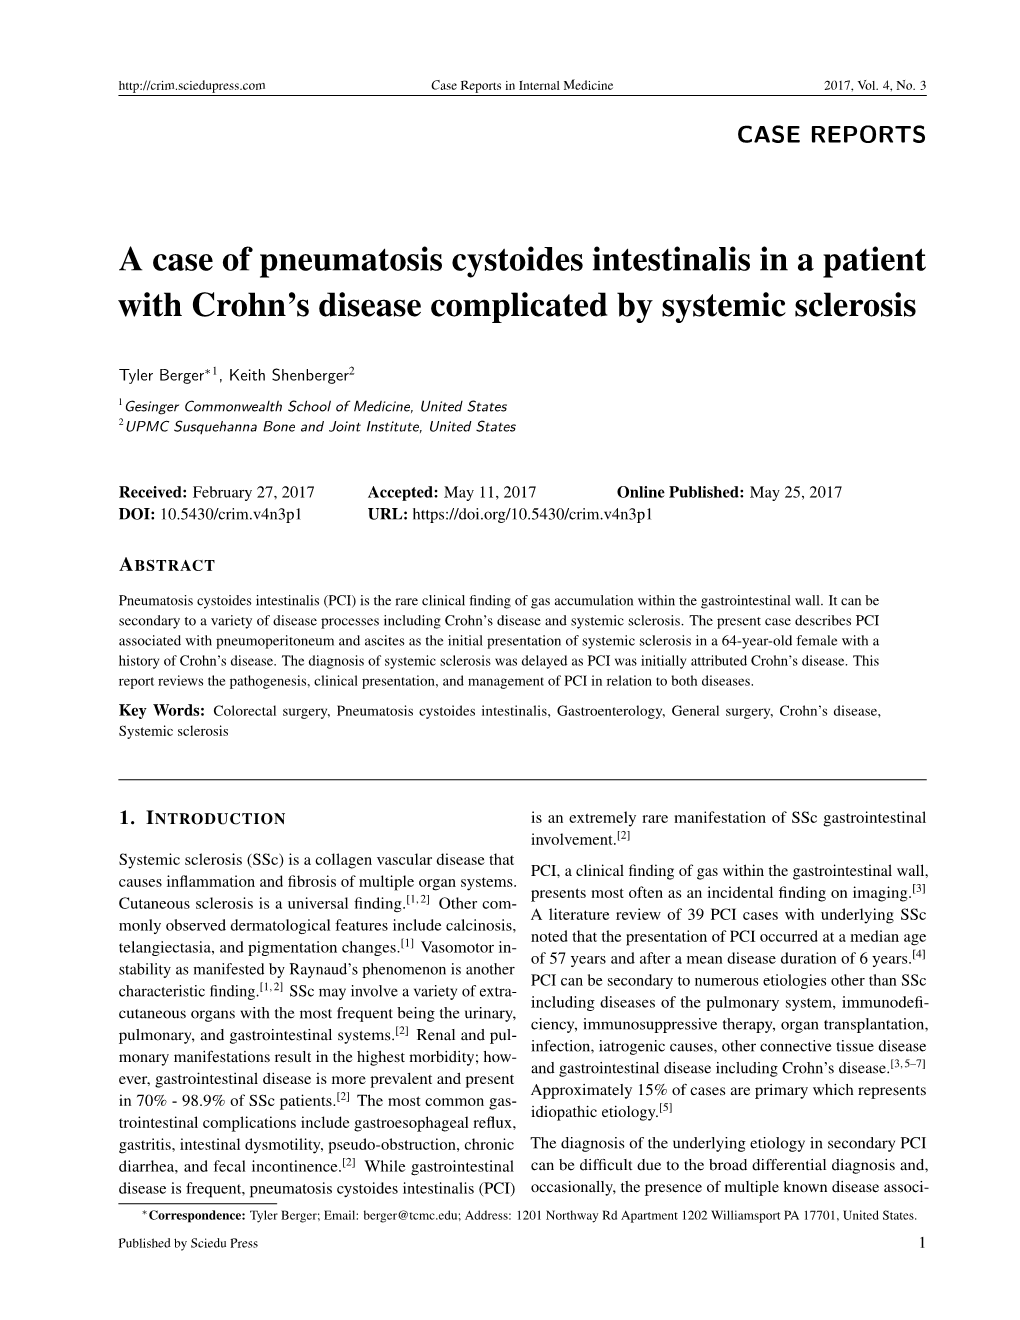 A Case of Pneumatosis Cystoides Intestinalis in a Patient with Crohn's